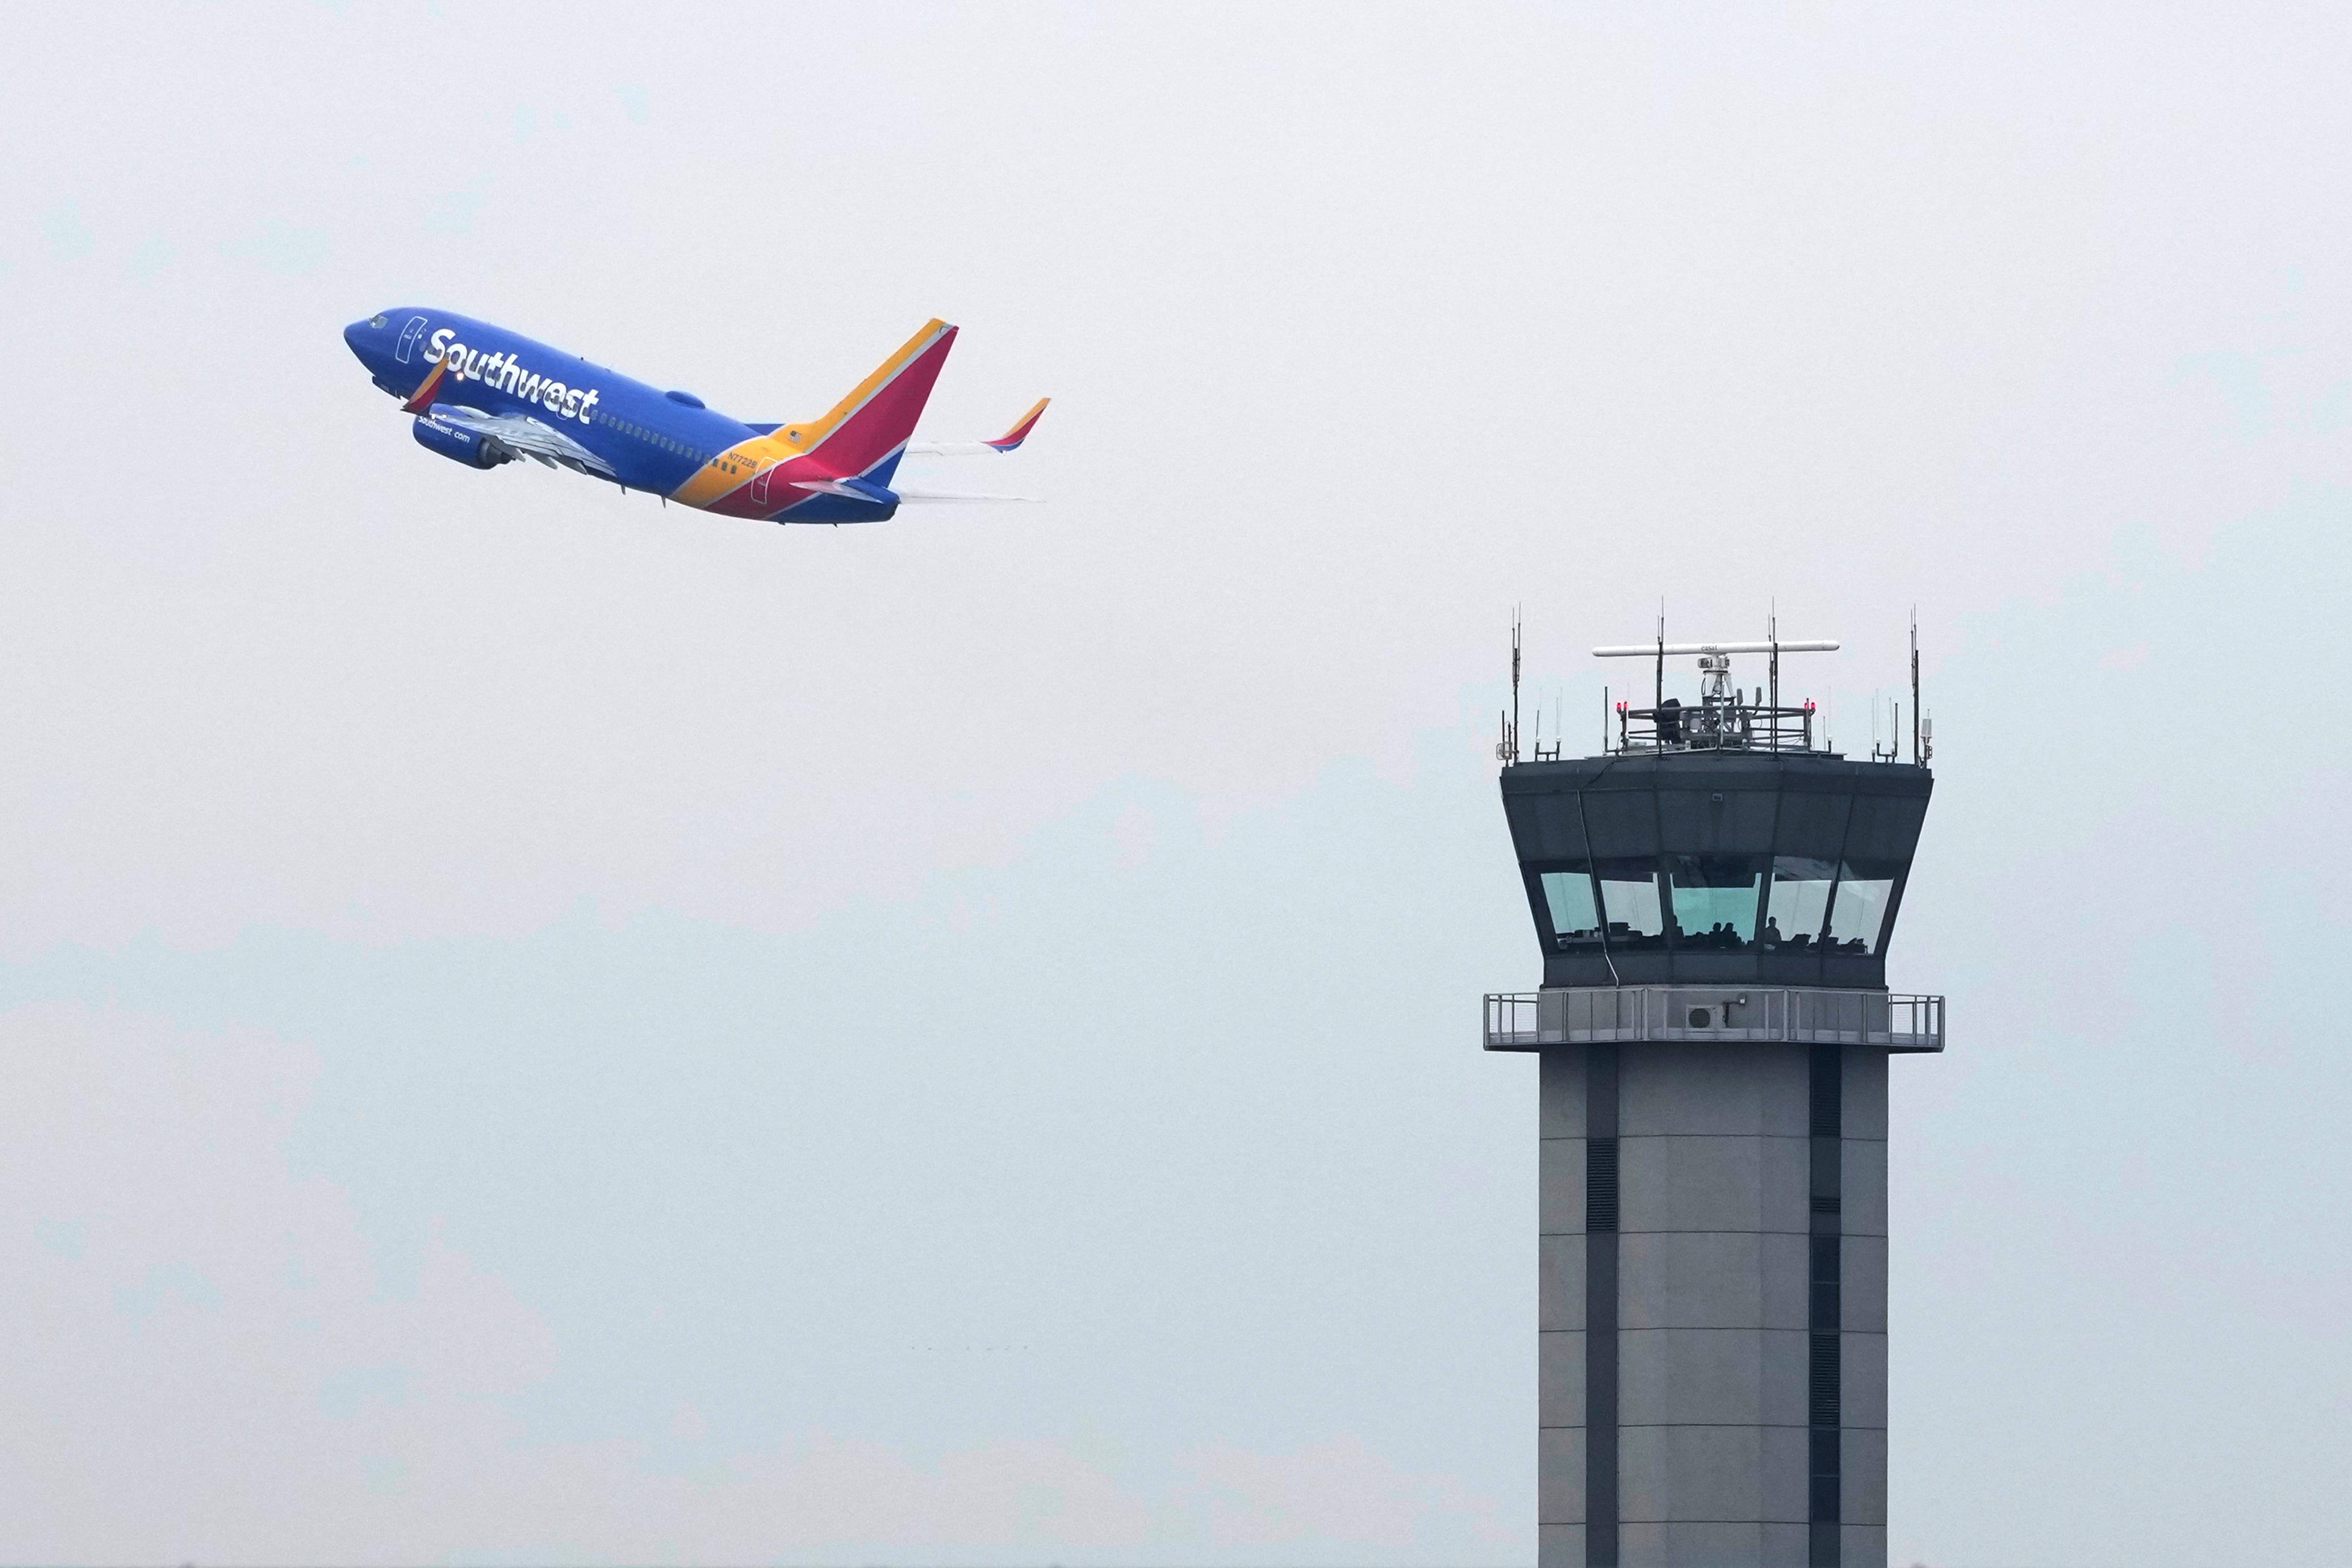 One-way tickets for as little as $59 during Southwest Airlines sale